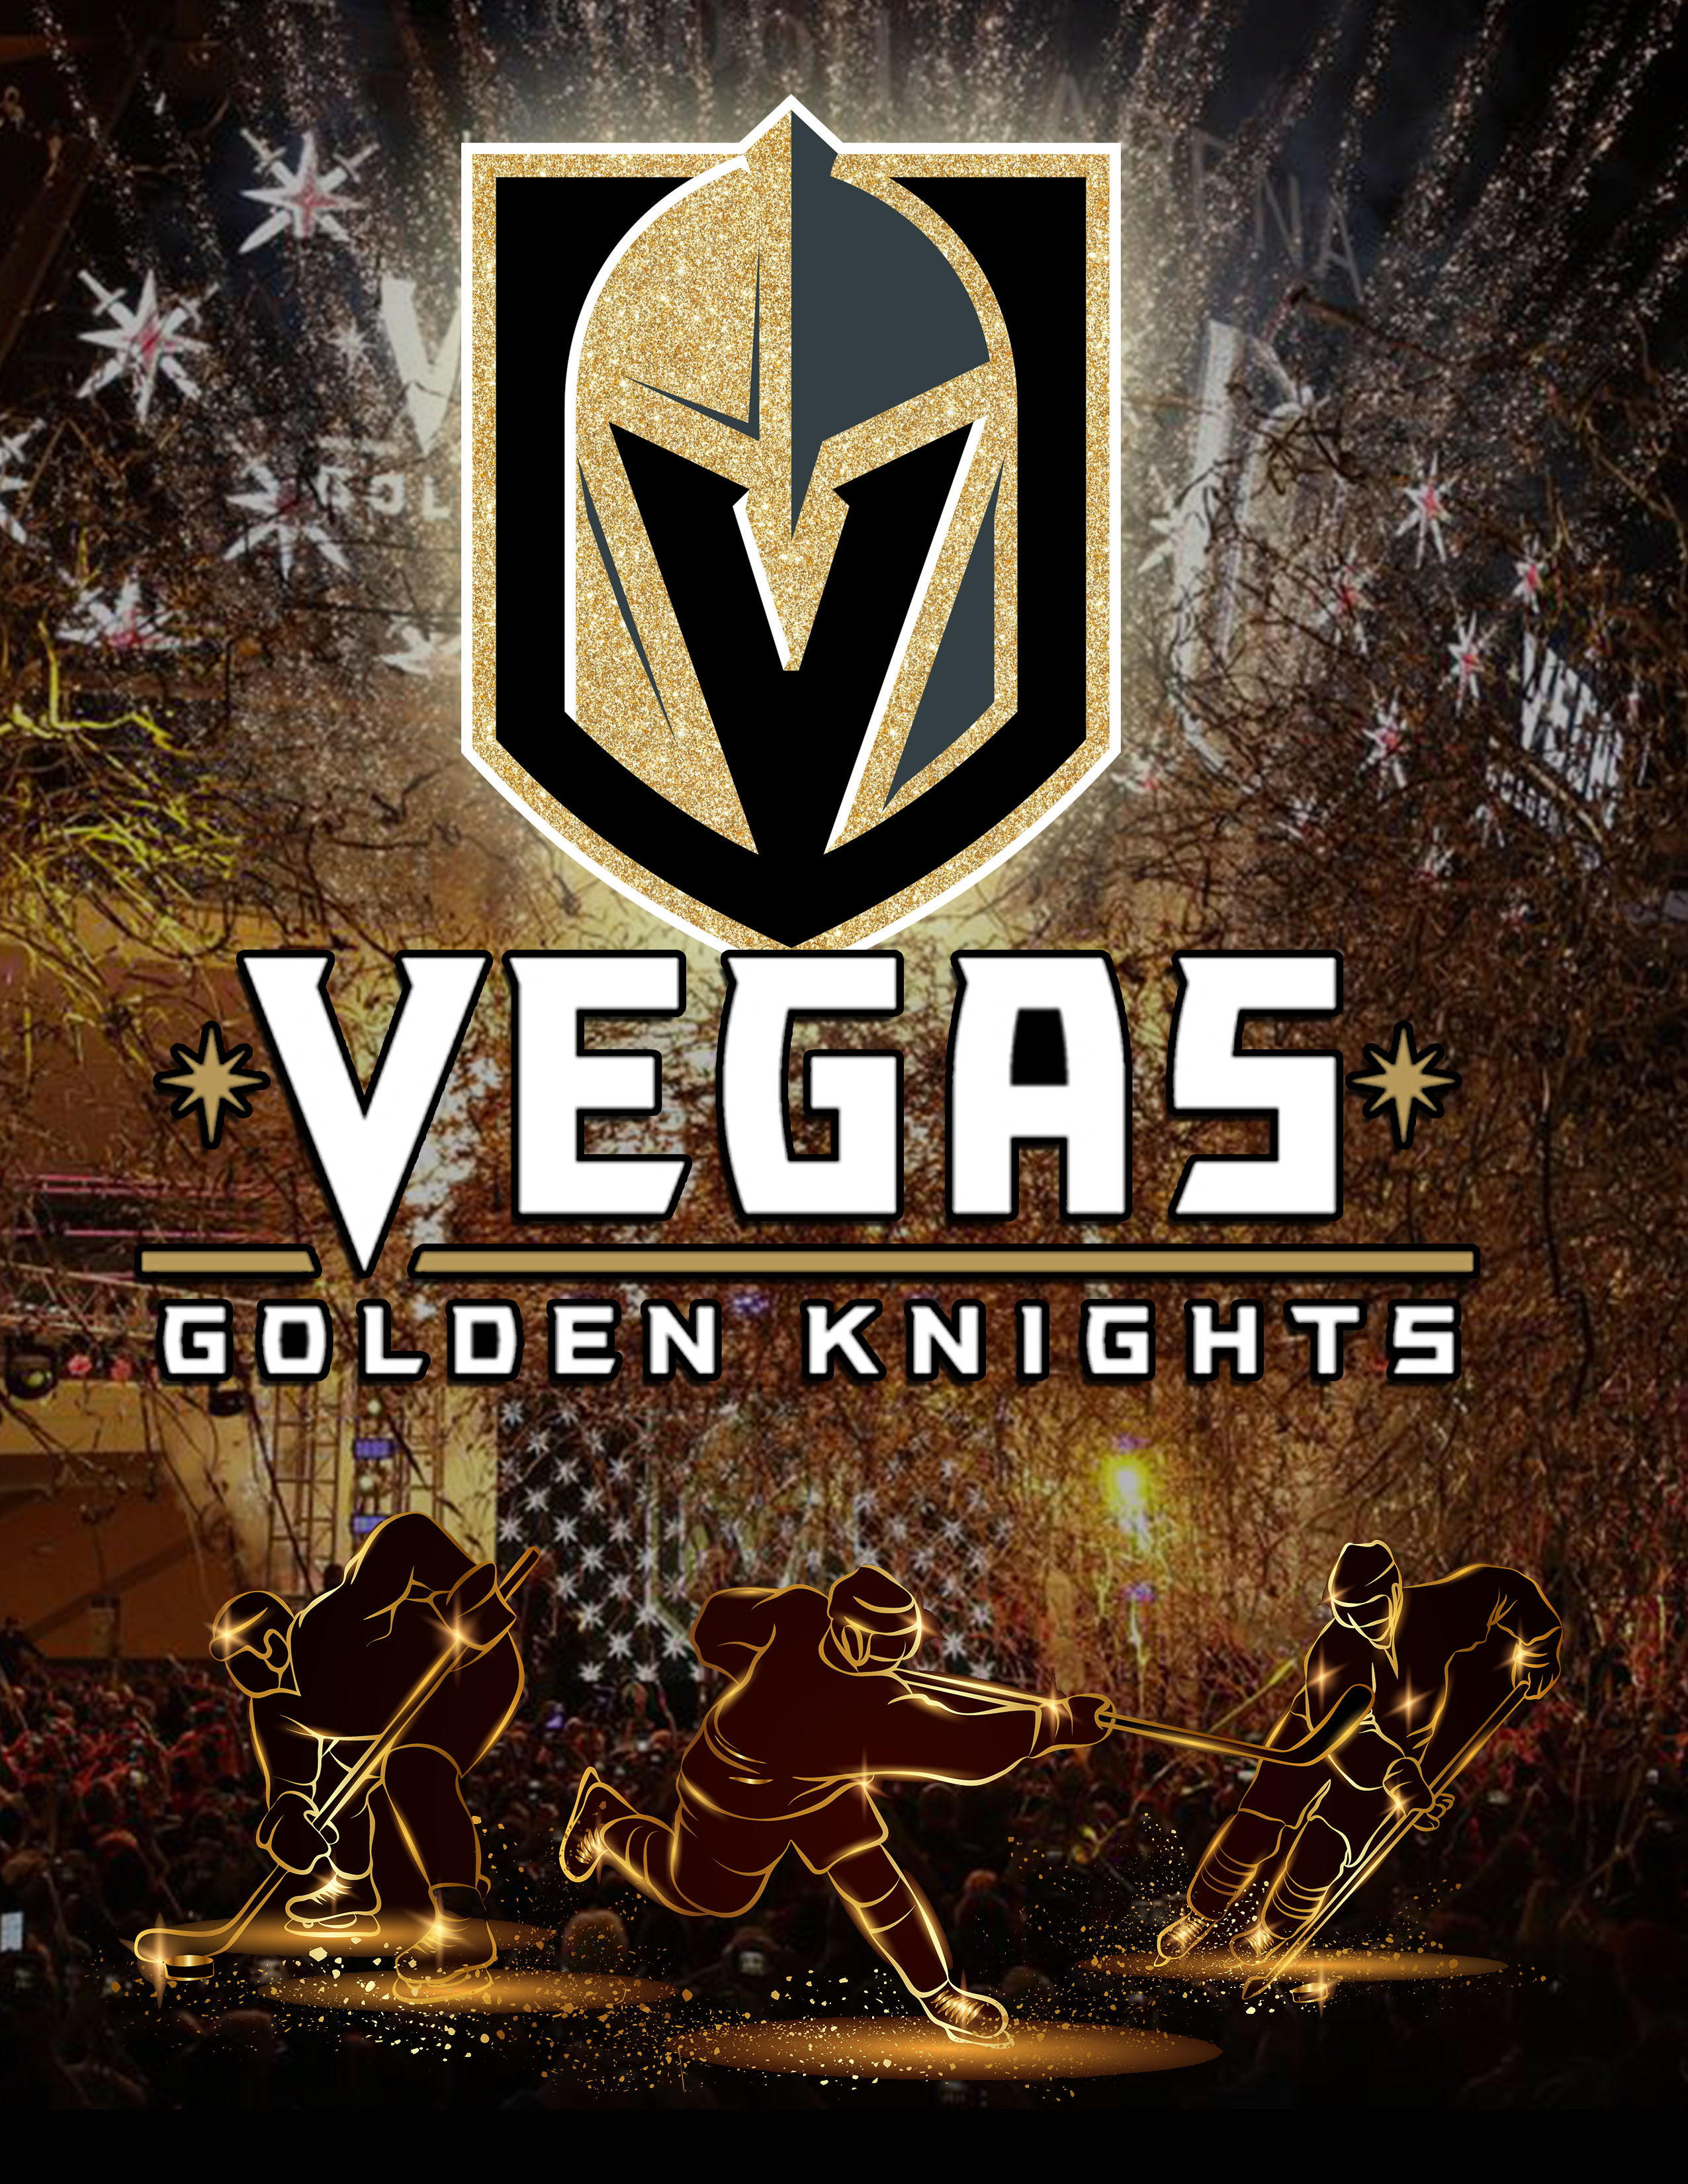 Everything You Need to Know About Golden Knights